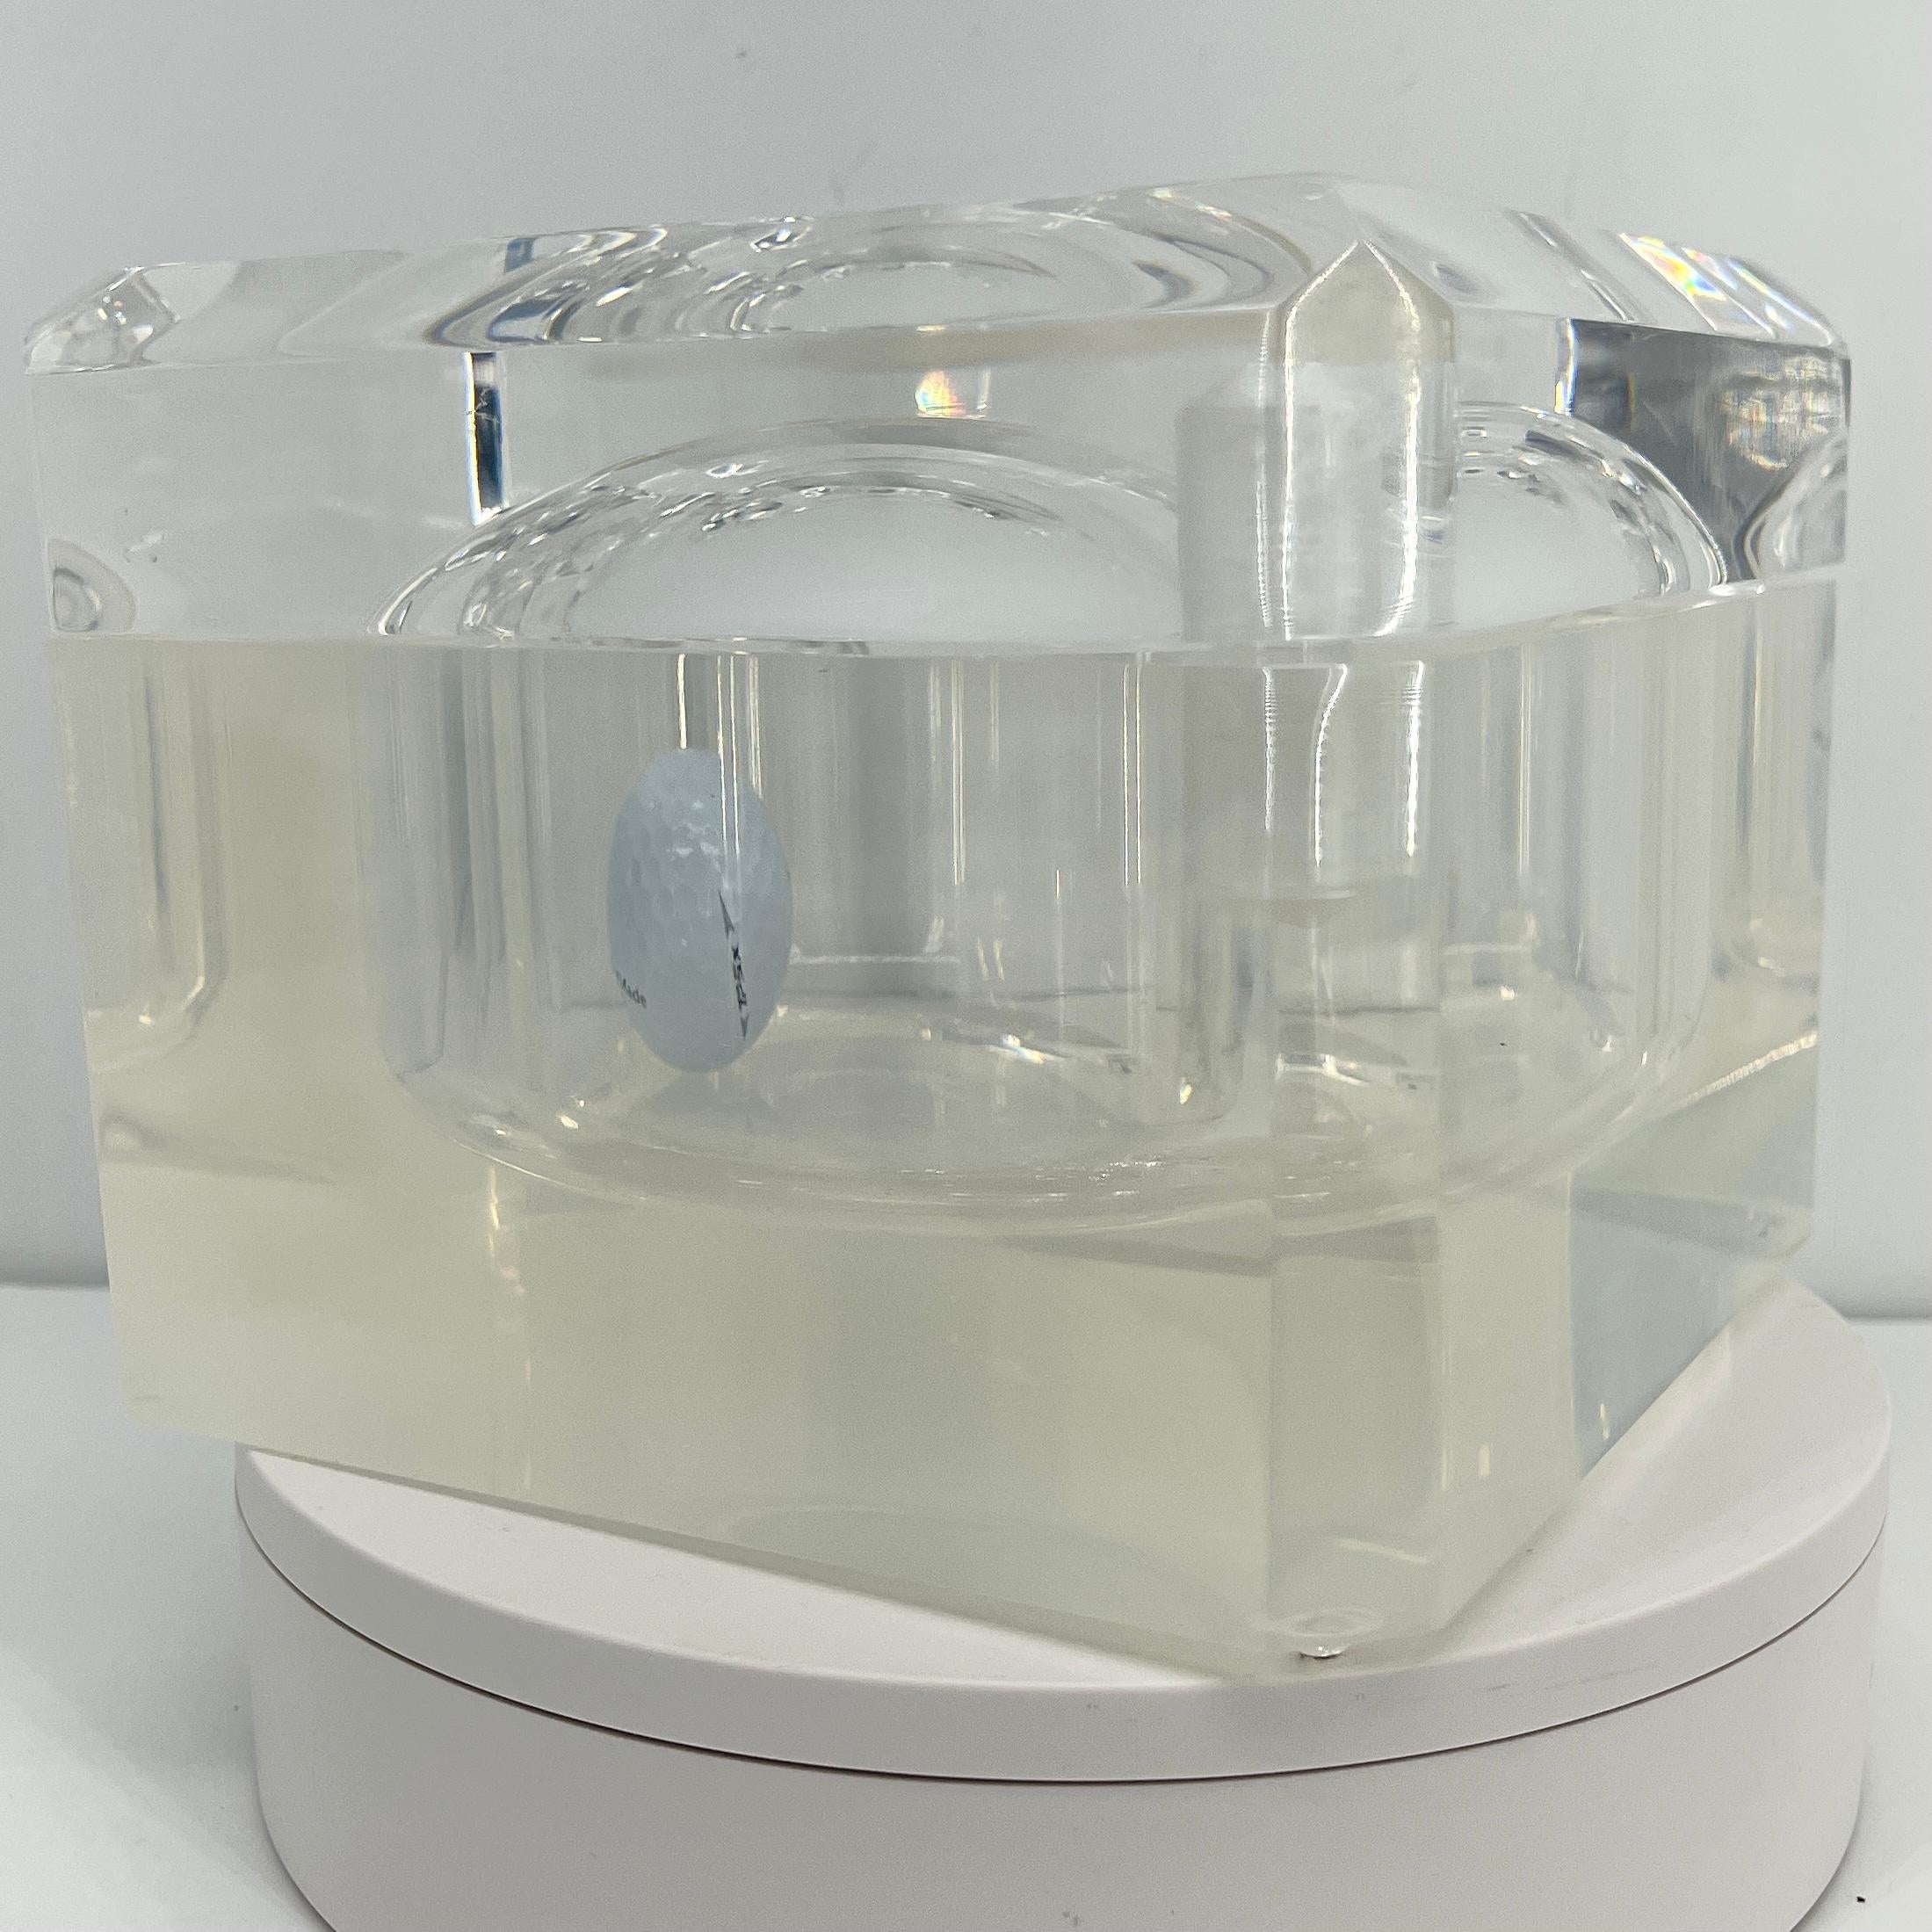 Mid-Century Modern lucite ice bucket. The polished lucite ice bucket will glow in the light of day as well as candlelit evenings. With beveled edges on the swivel top, this low profile bucket is a necessary addition to any modern decor. The interior